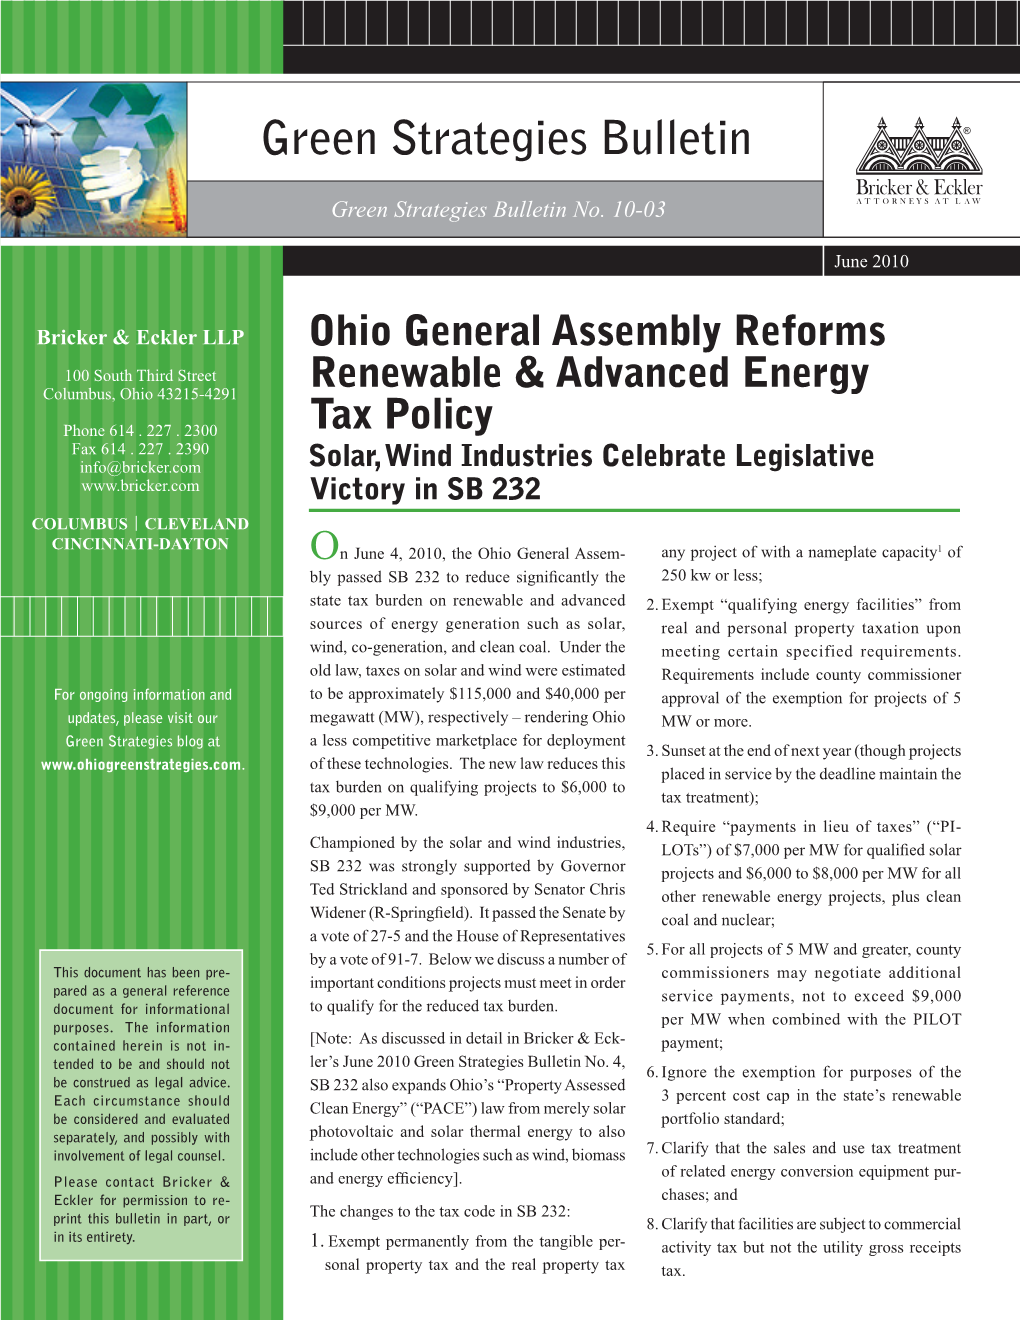 Ohio General Assembly Reforms Renewable & Advance Energy Tax